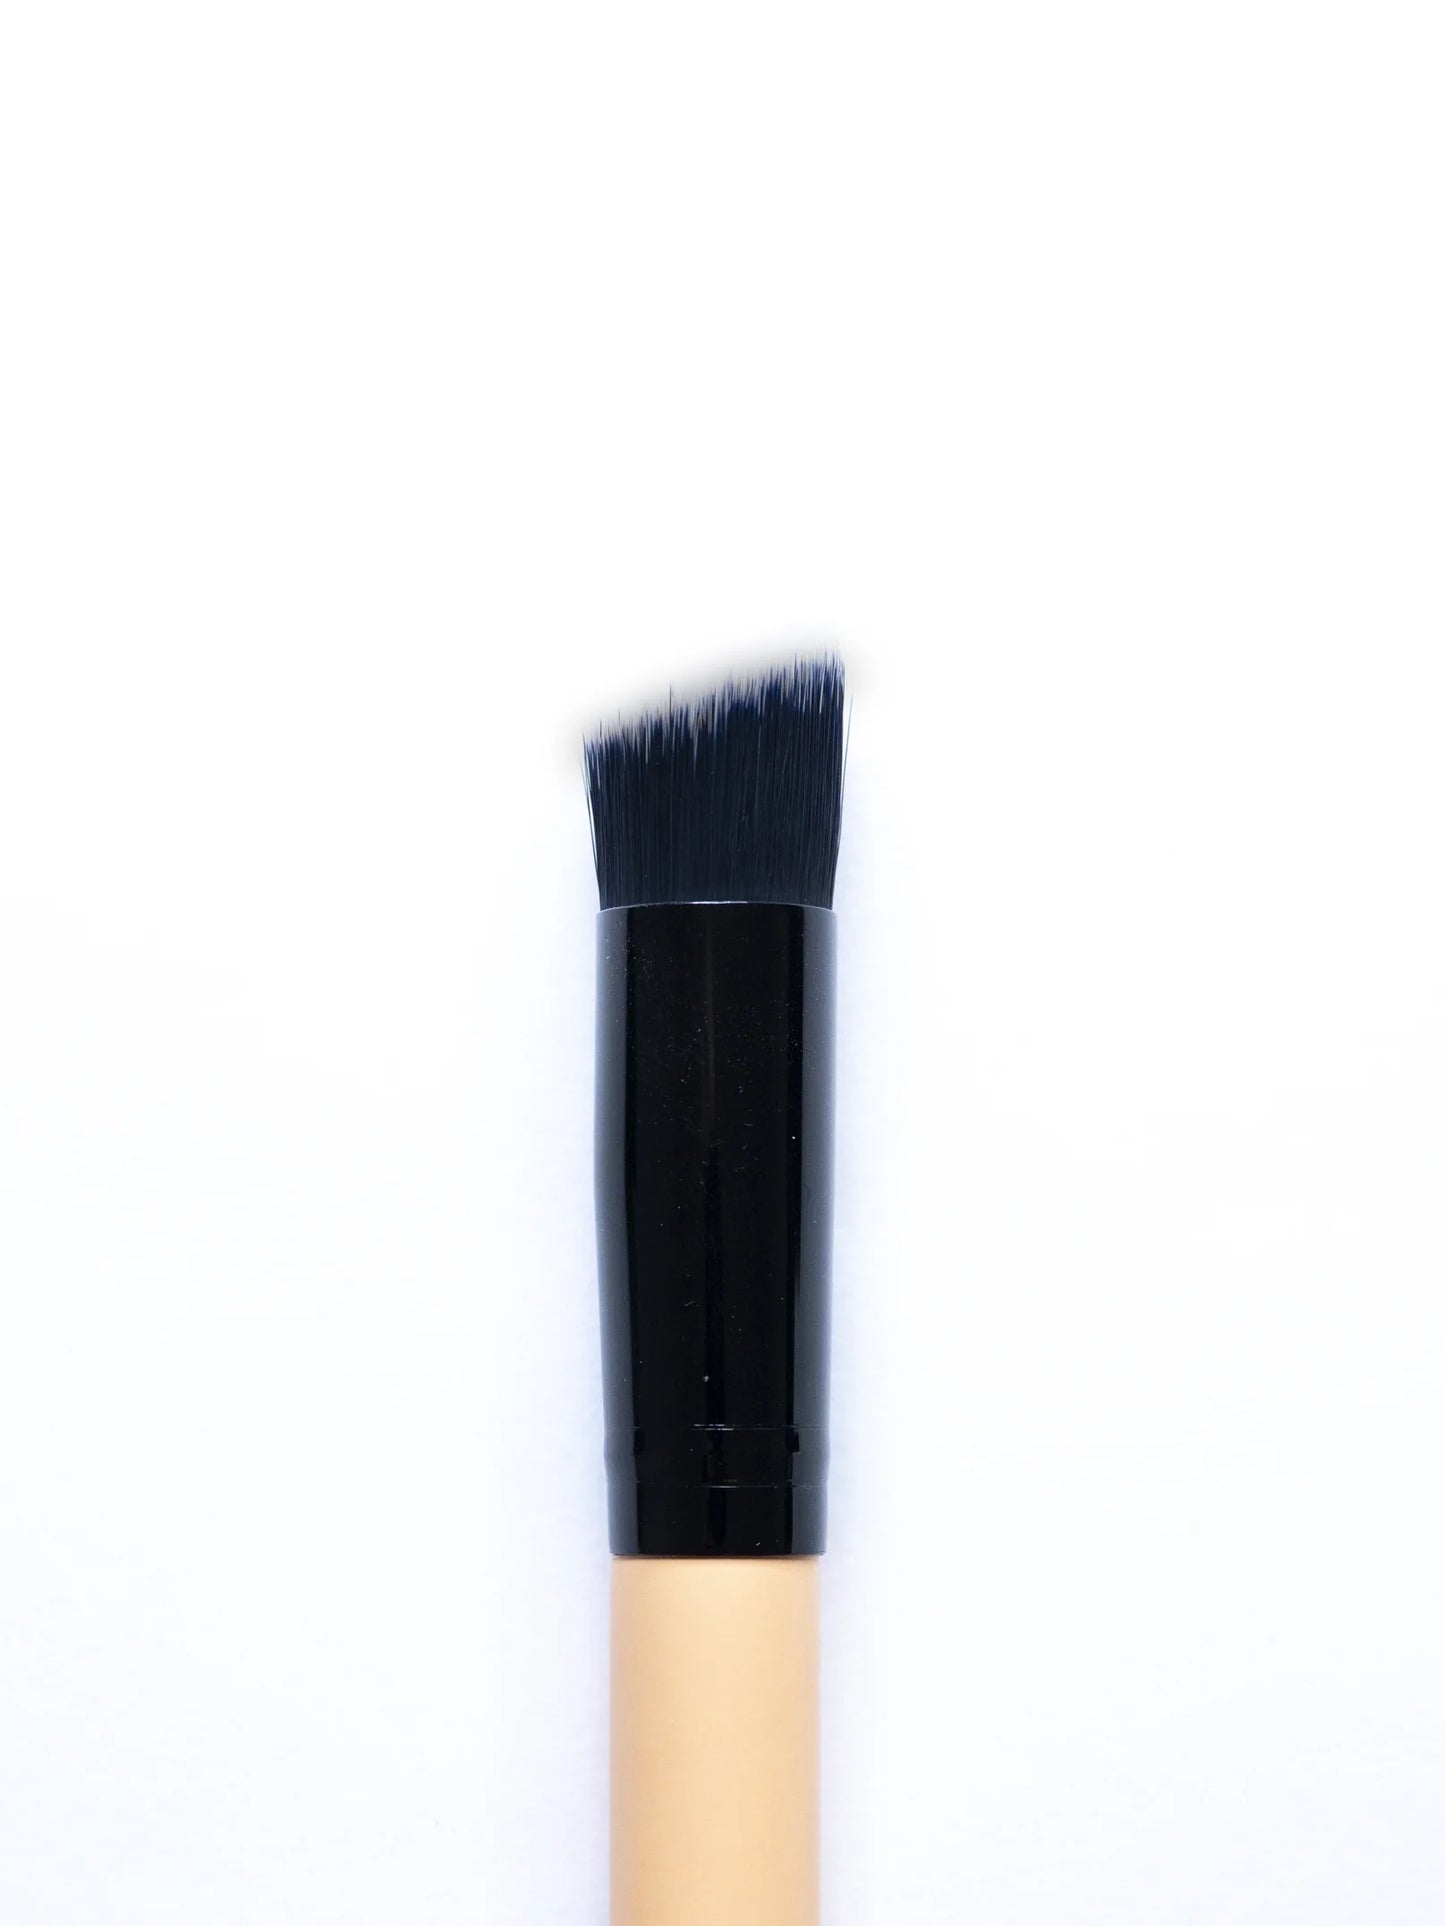 Detailed Foundation / Concealer Brush 34 Make-up Brush EDY LONDON Pale Pink   - EDY LONDON PRODUCTS UK - The Best Makeup Brushes - shop.edy.london